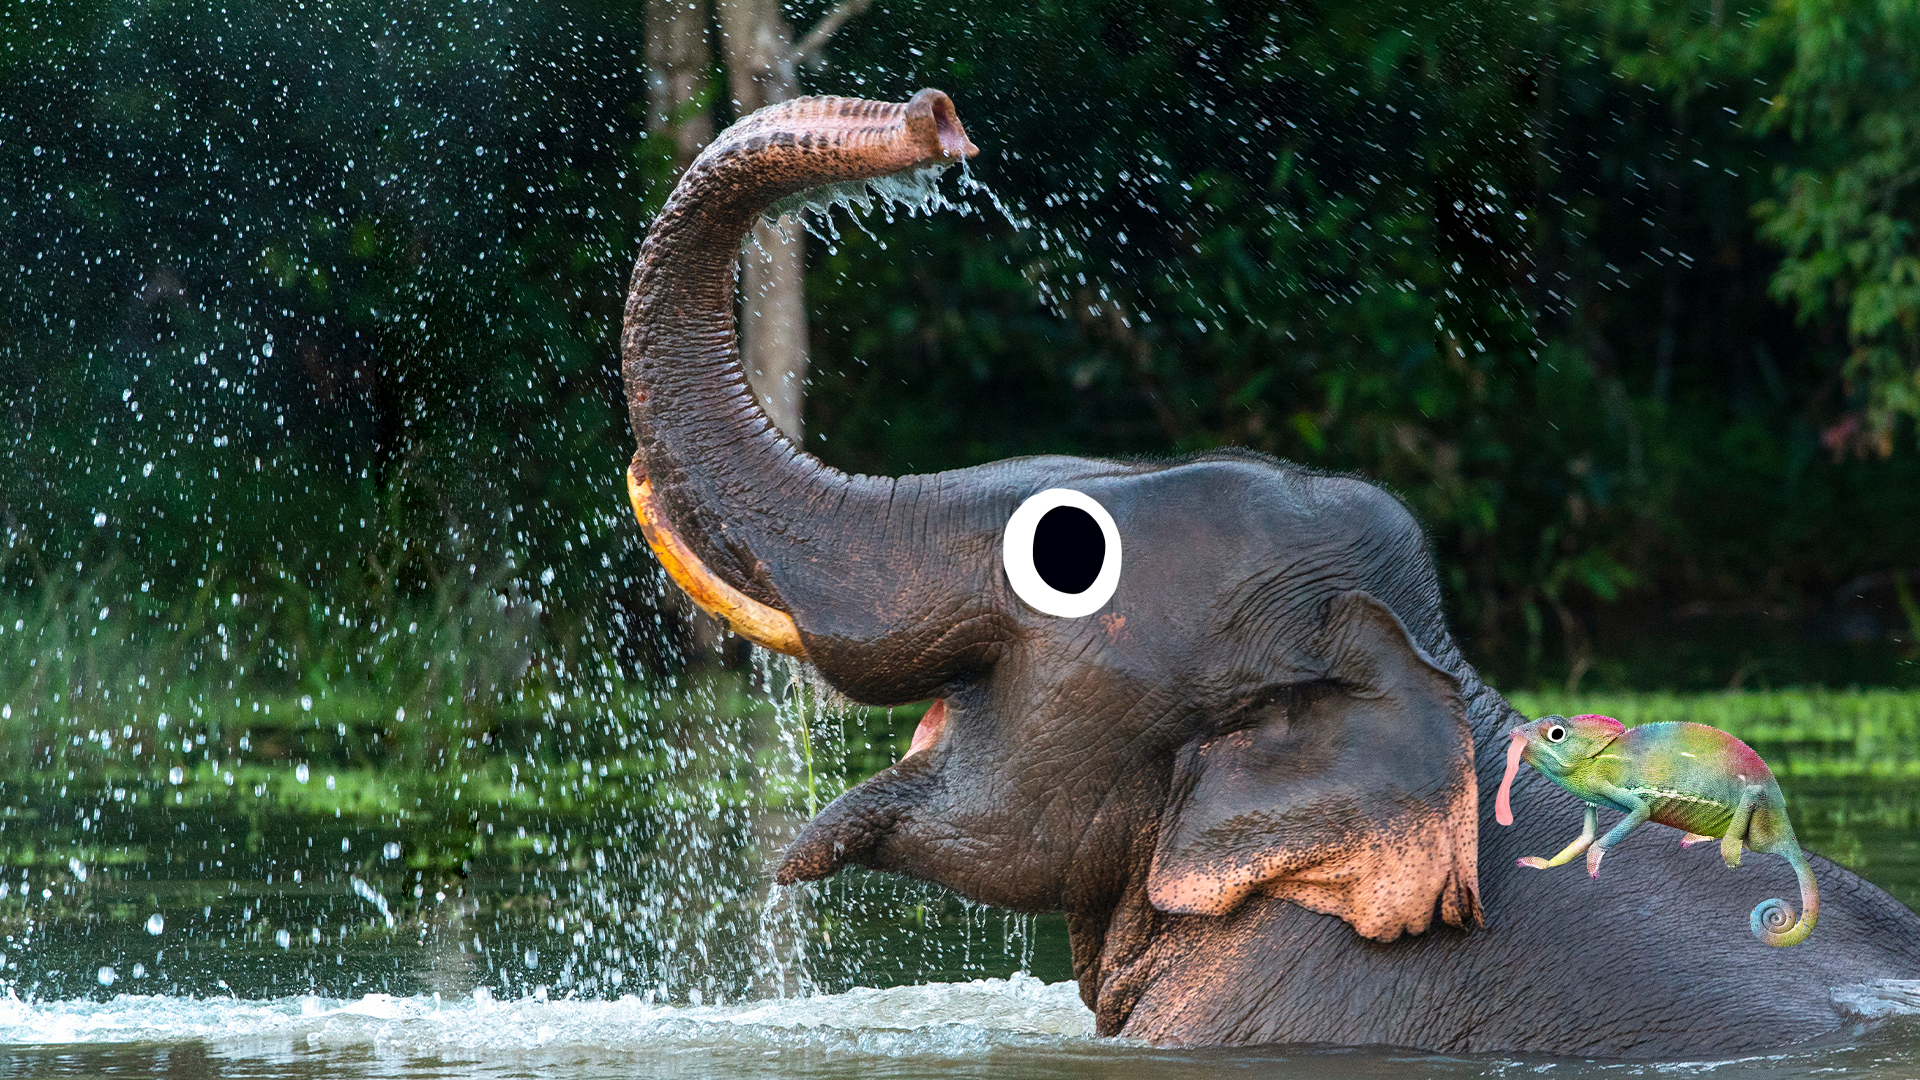 Elephant in water with Beano chameleon